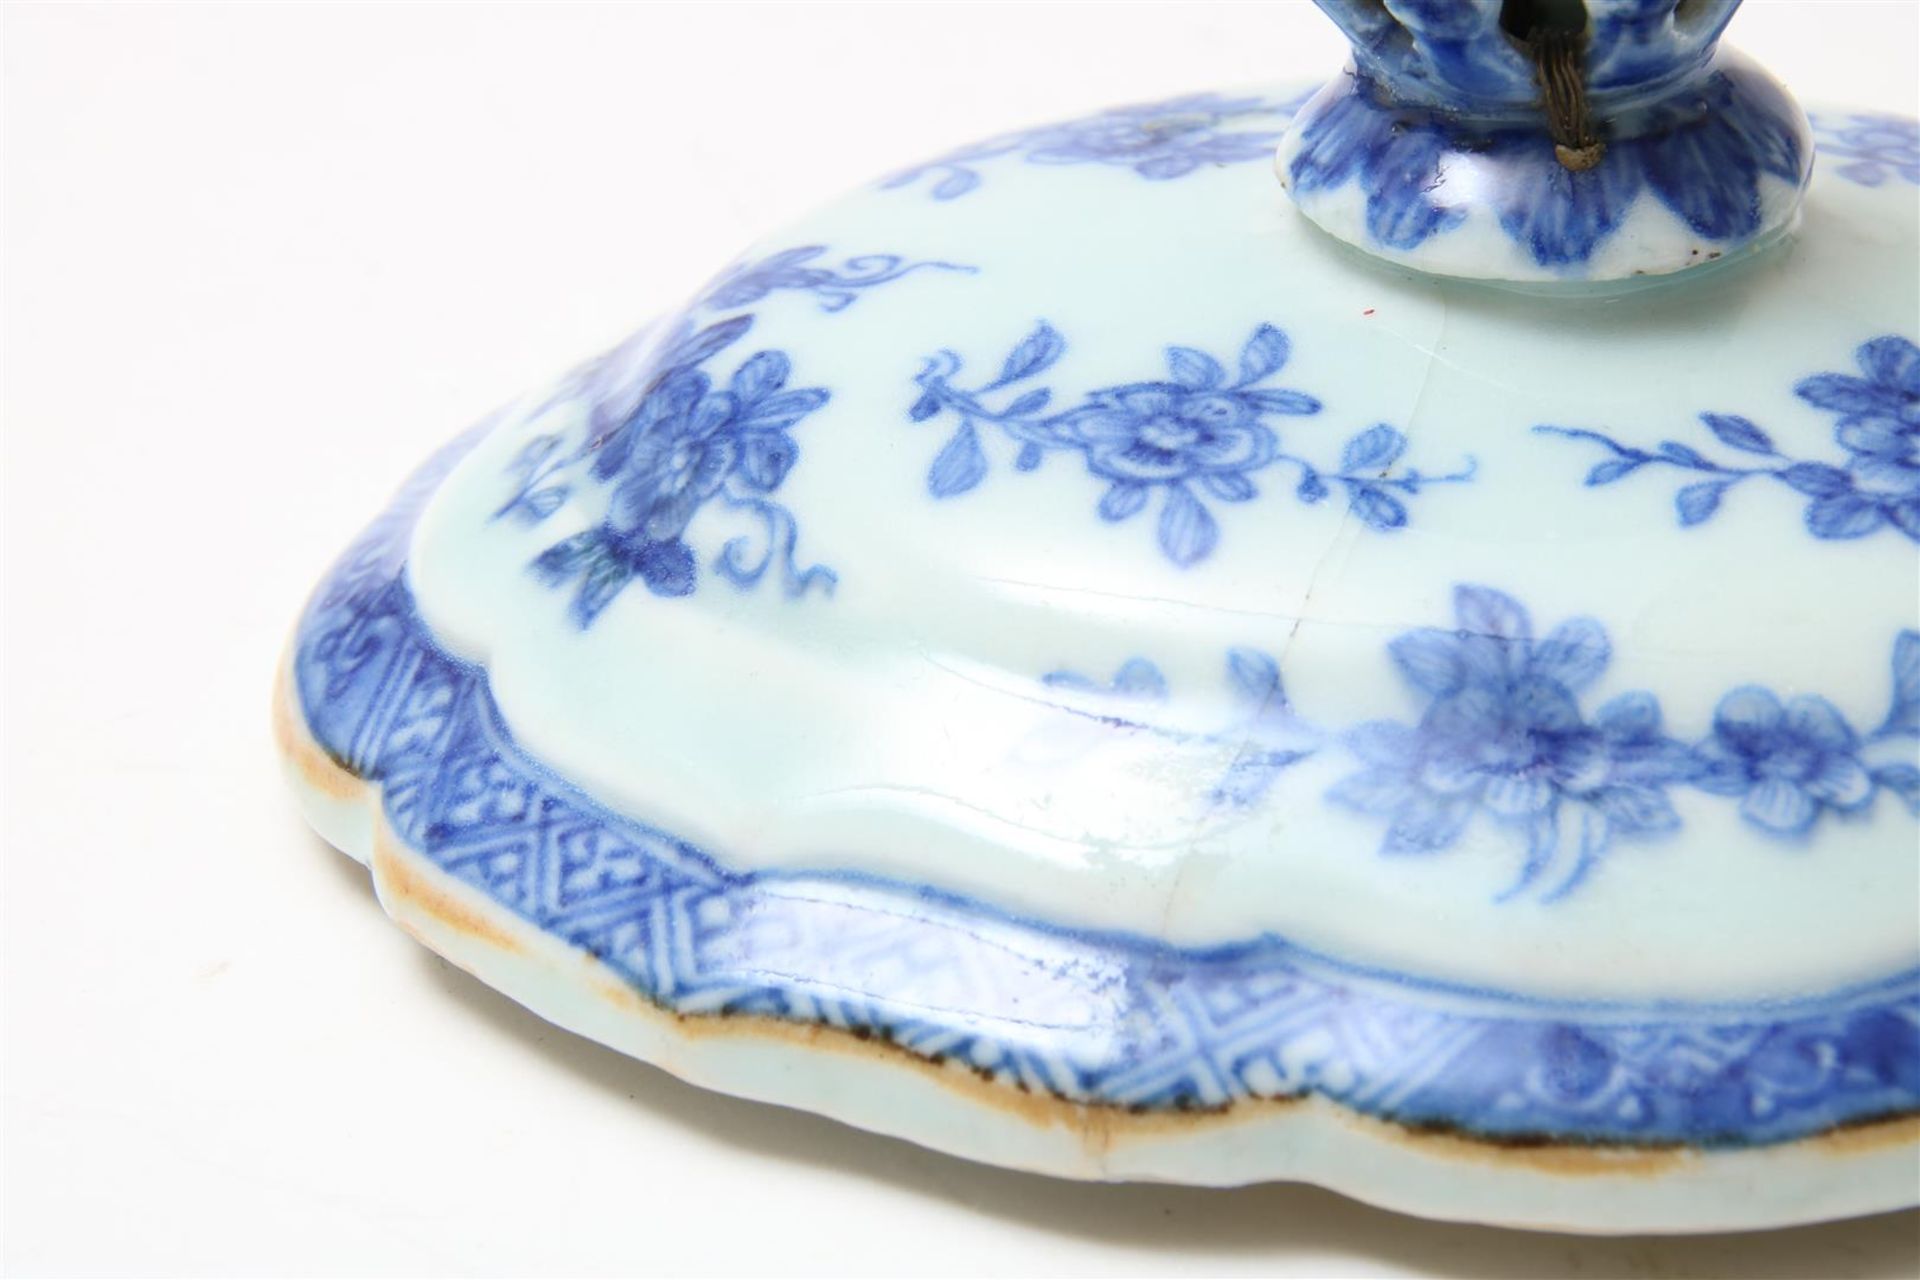 Lot of a pair of Kangxi cups and saucers with decoration of flowering shrubs, (1x saucer with - Image 6 of 6